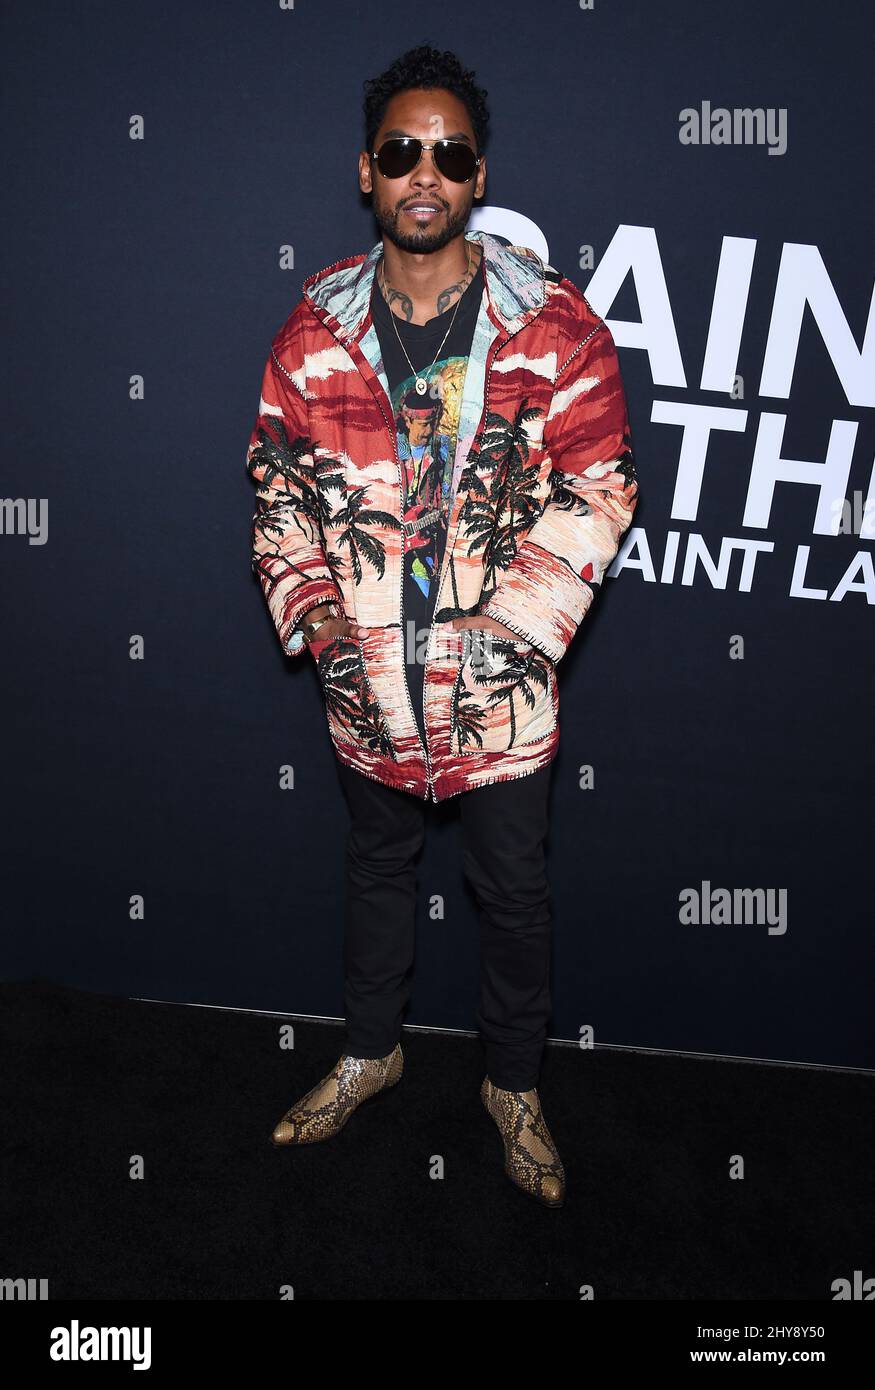 Miguel attending the Saint Laurent event held at the Hollywood Palladium in Los Angeles, California. Stock Photo